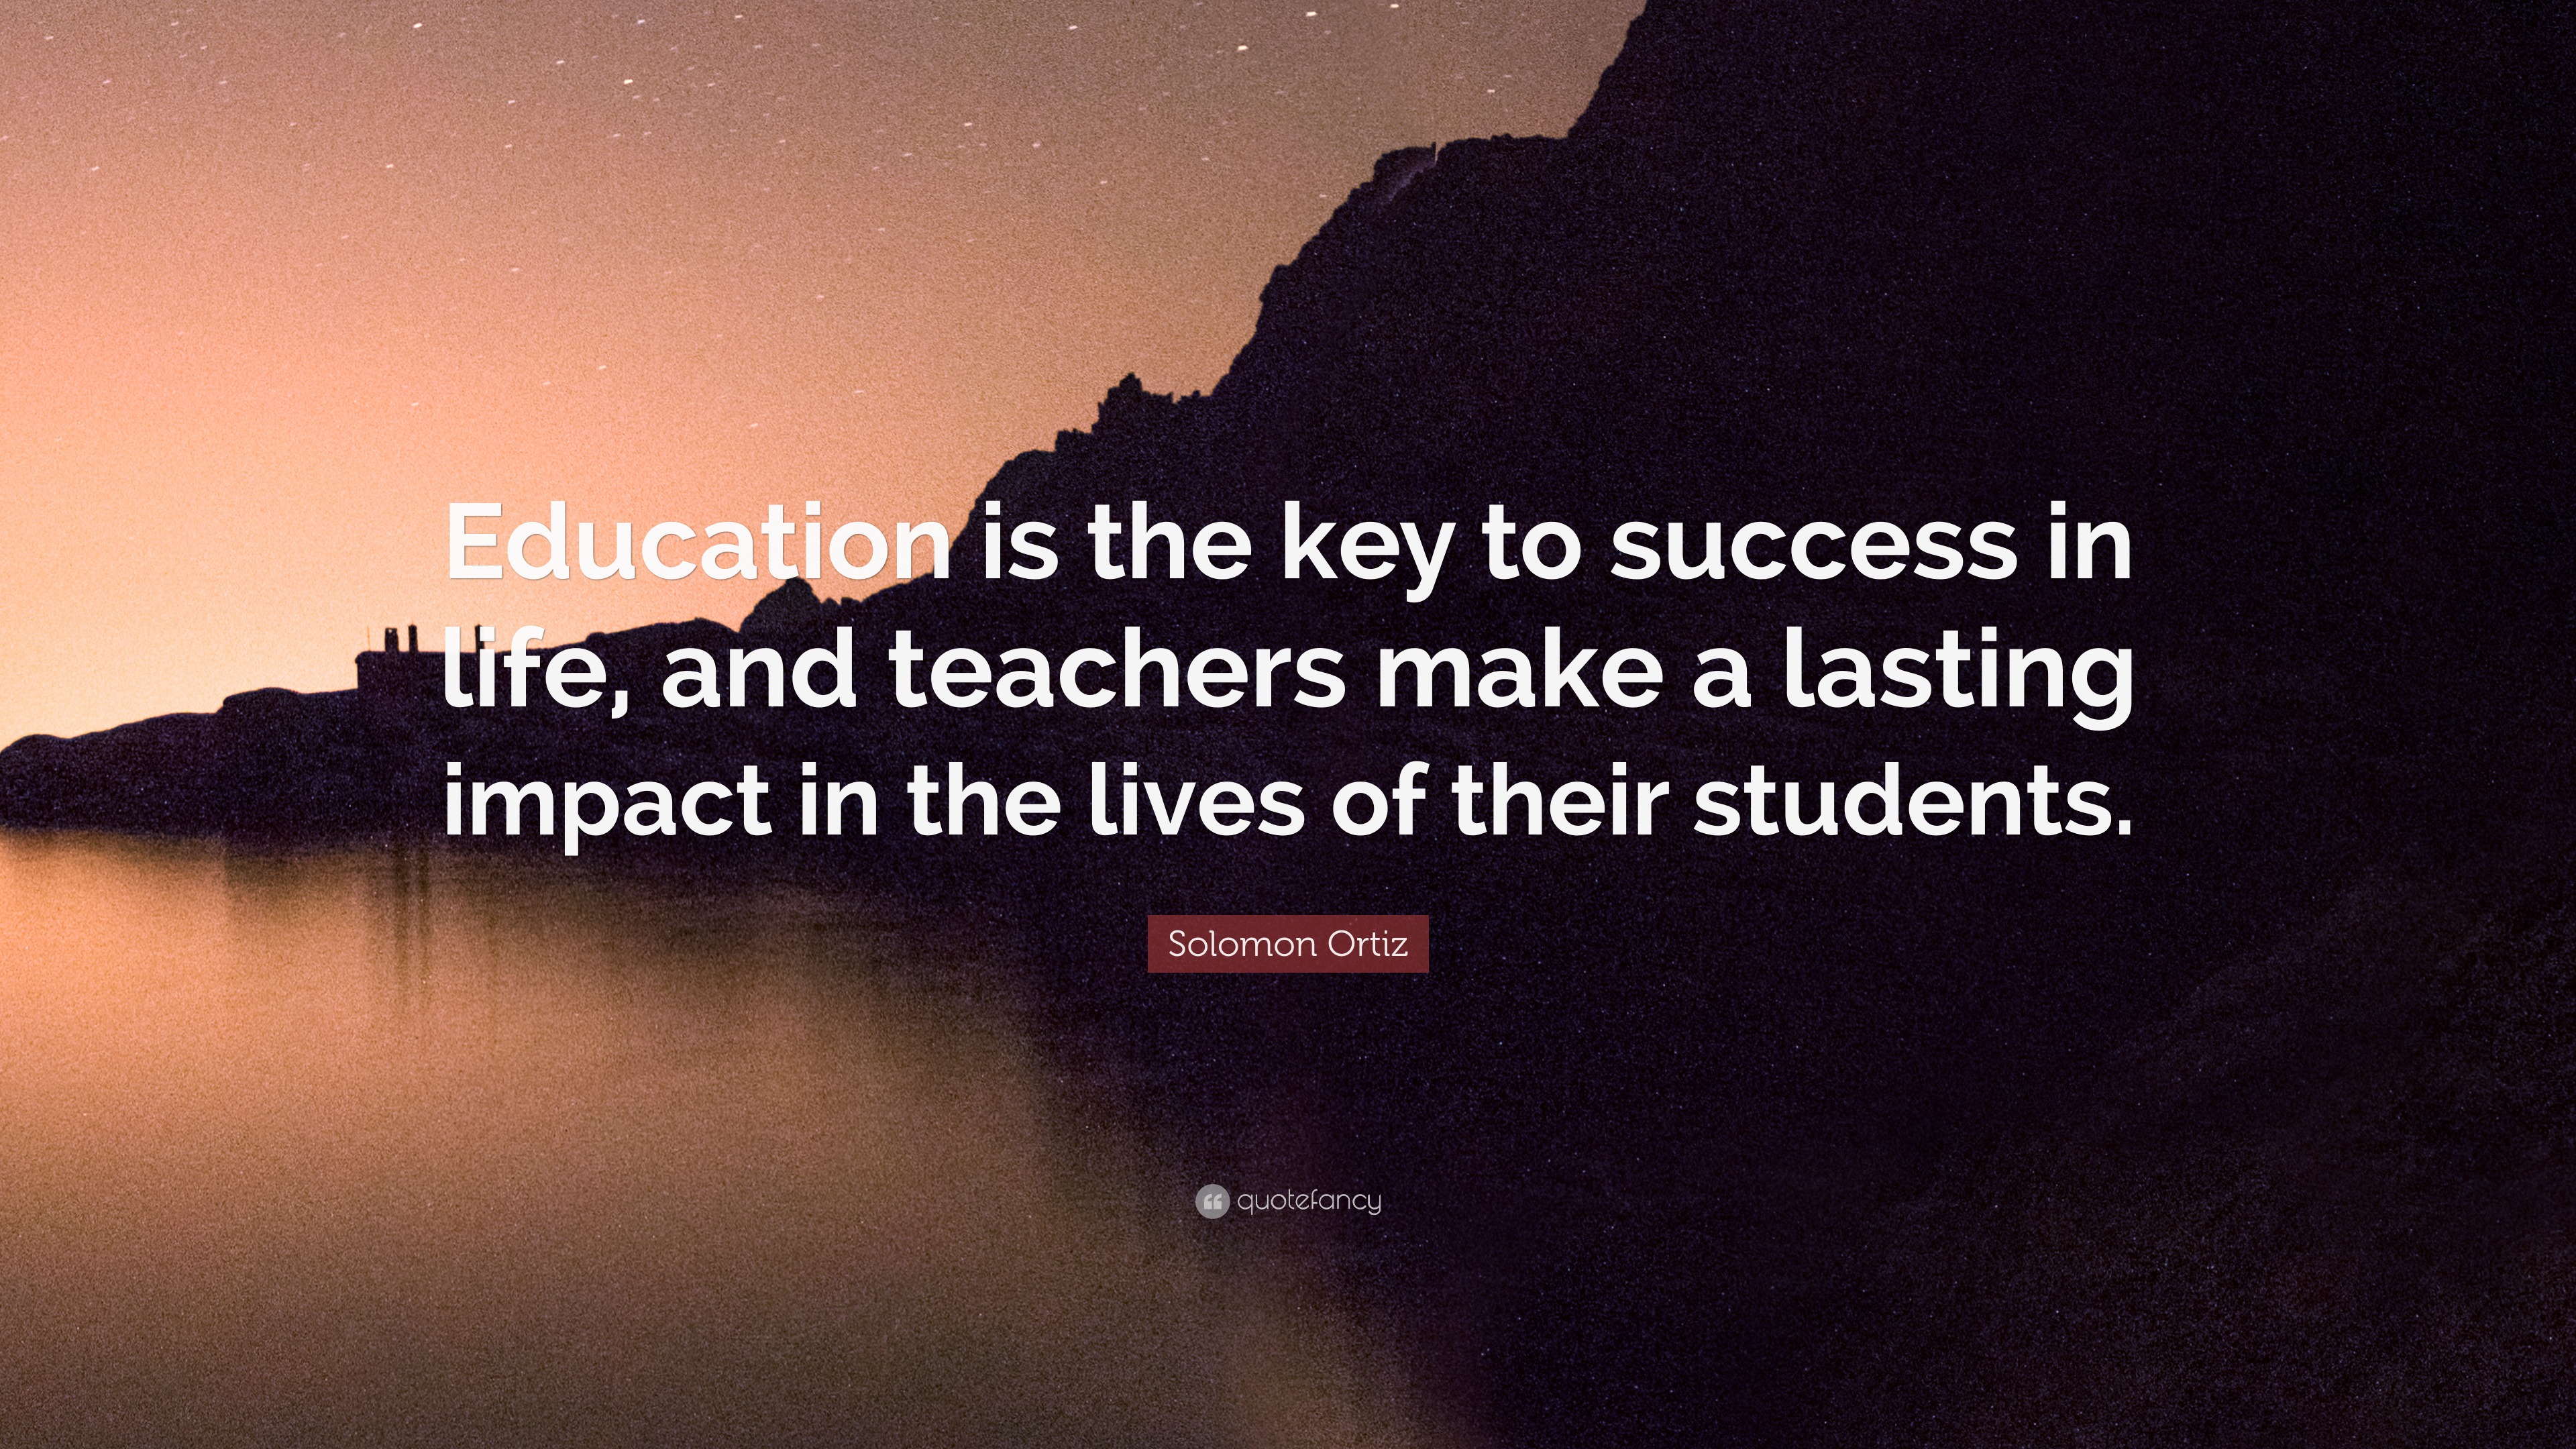 education is the key to future success